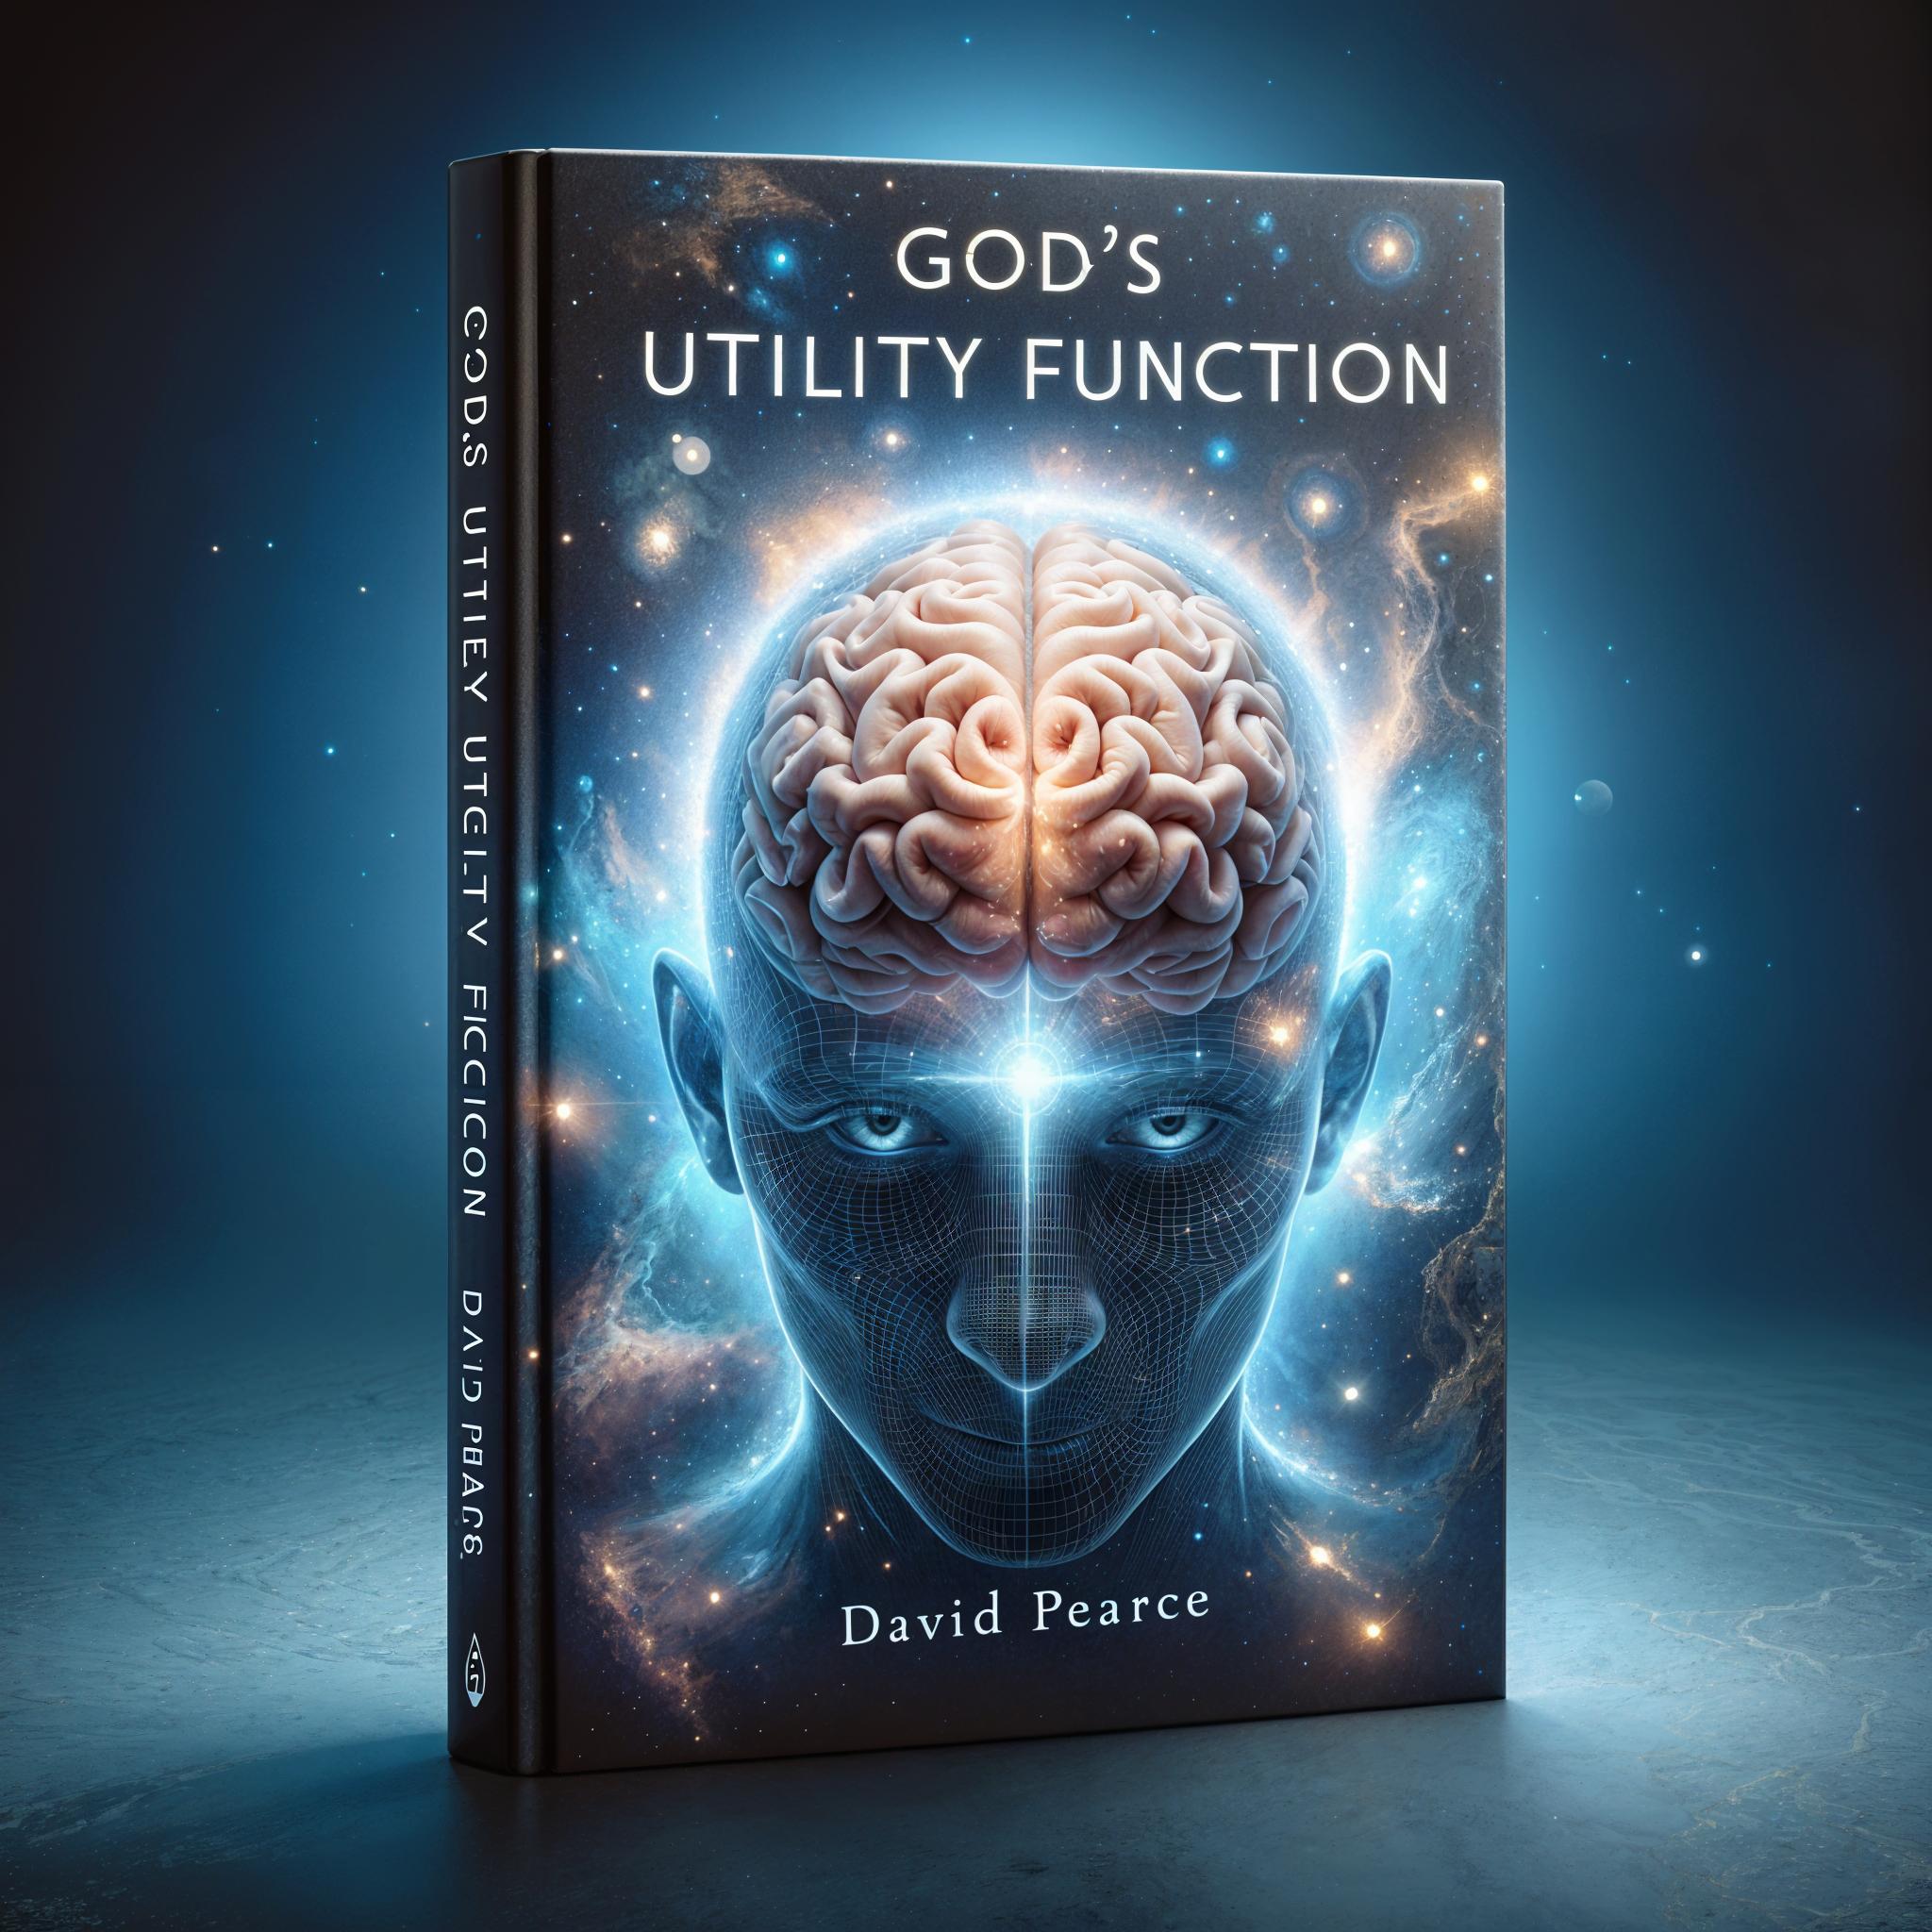 God's Utility Function by David Pearce